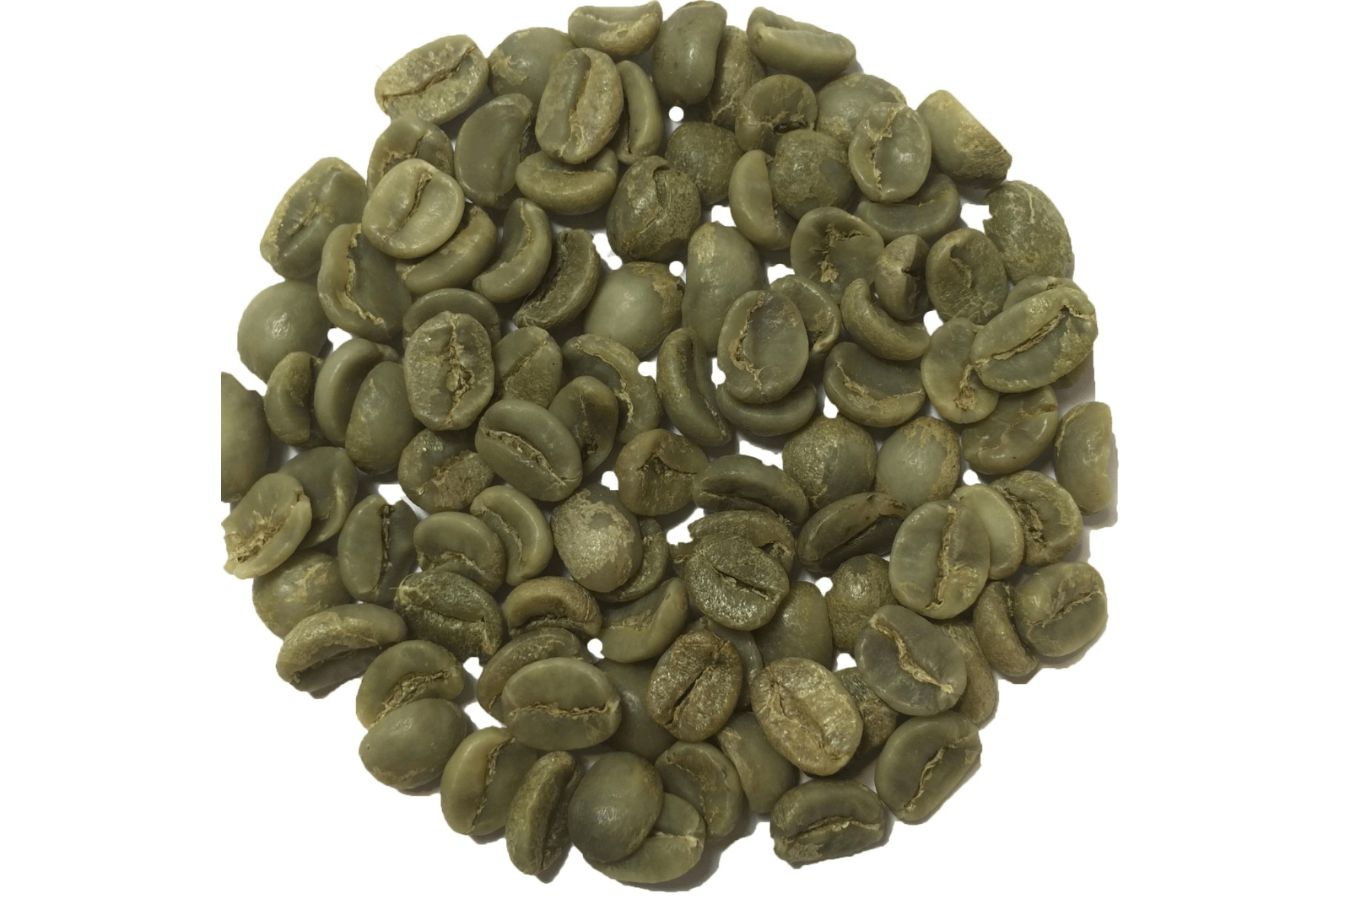 What Is Green Coffee?